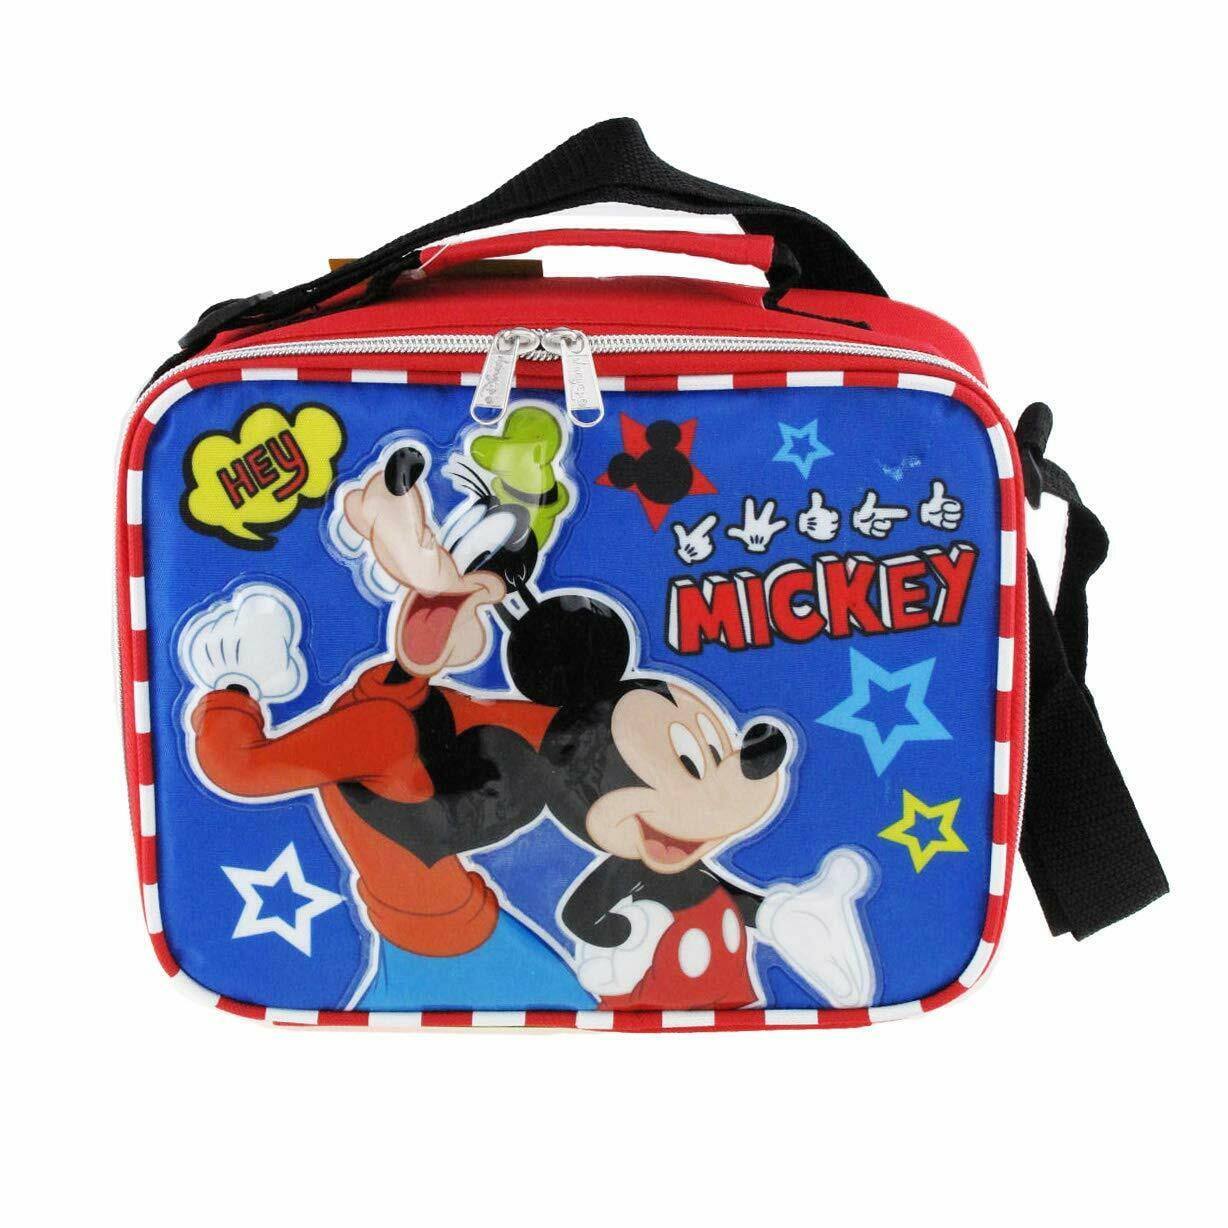 12524 SUBWAY DISNEY’S MICKEY MOUSE LUNCH BAG WITH FUN PUZZLE 